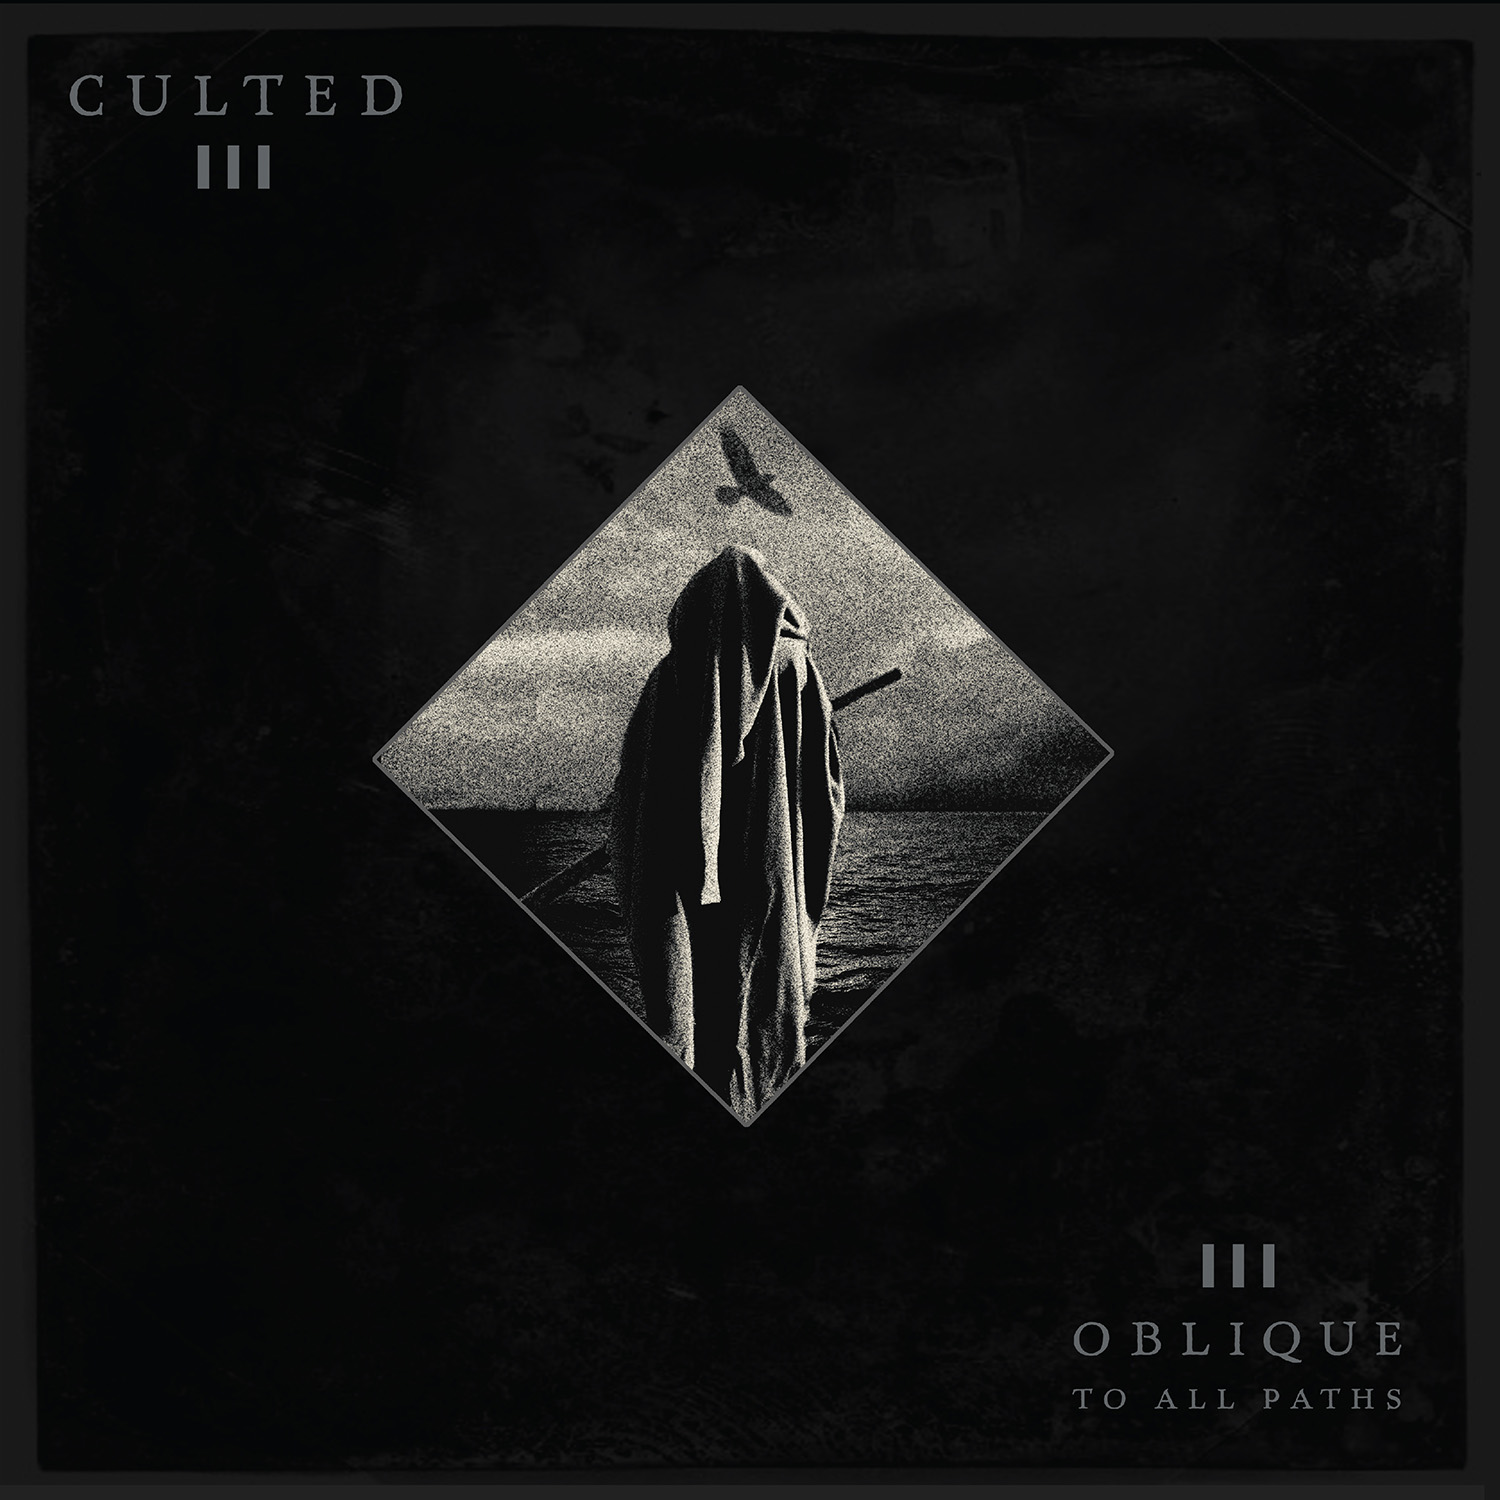 Culted – Oblique to All Paths Review